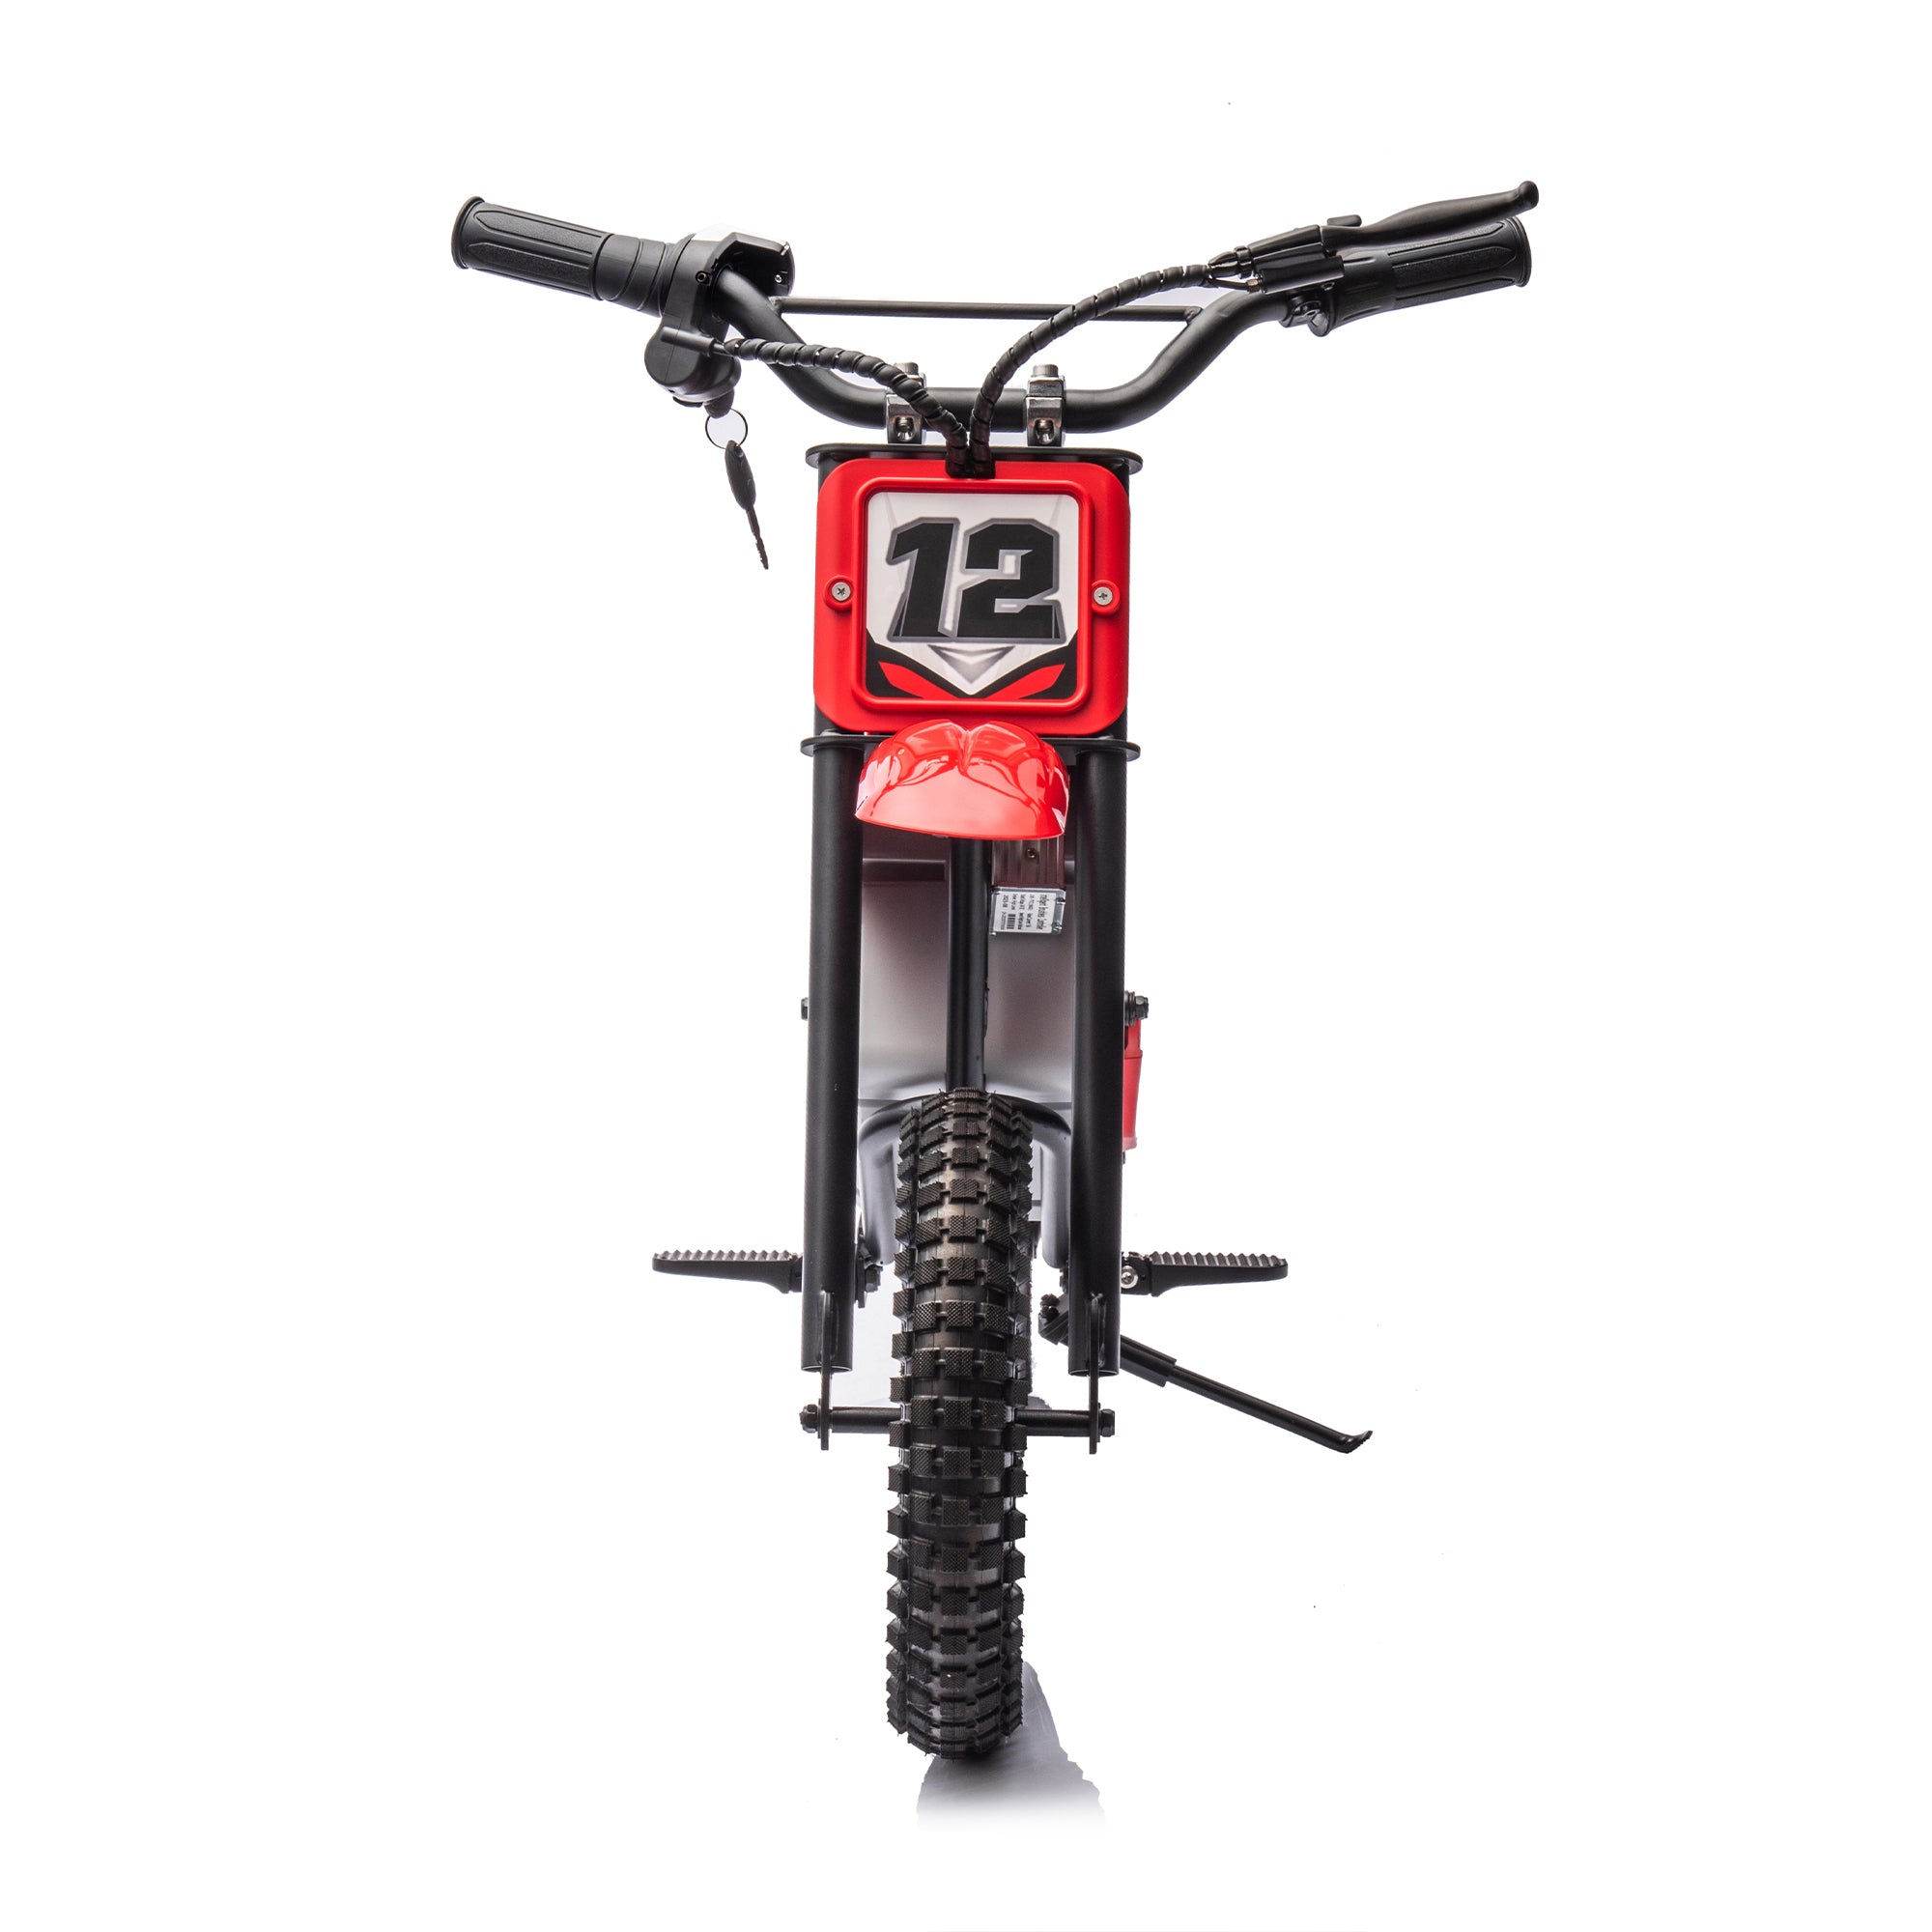 🆓🚛 36V Electric Mini Dirt Motorcycle for Kids, 350W Xxxl Motorcycle, Stepless Variable Speed Drive, Disc Brake, No Chain, Steady Acceleration, Horn, Power Display, Rate Display, 176 Pounds for 50M Or More, Age 14+, Red